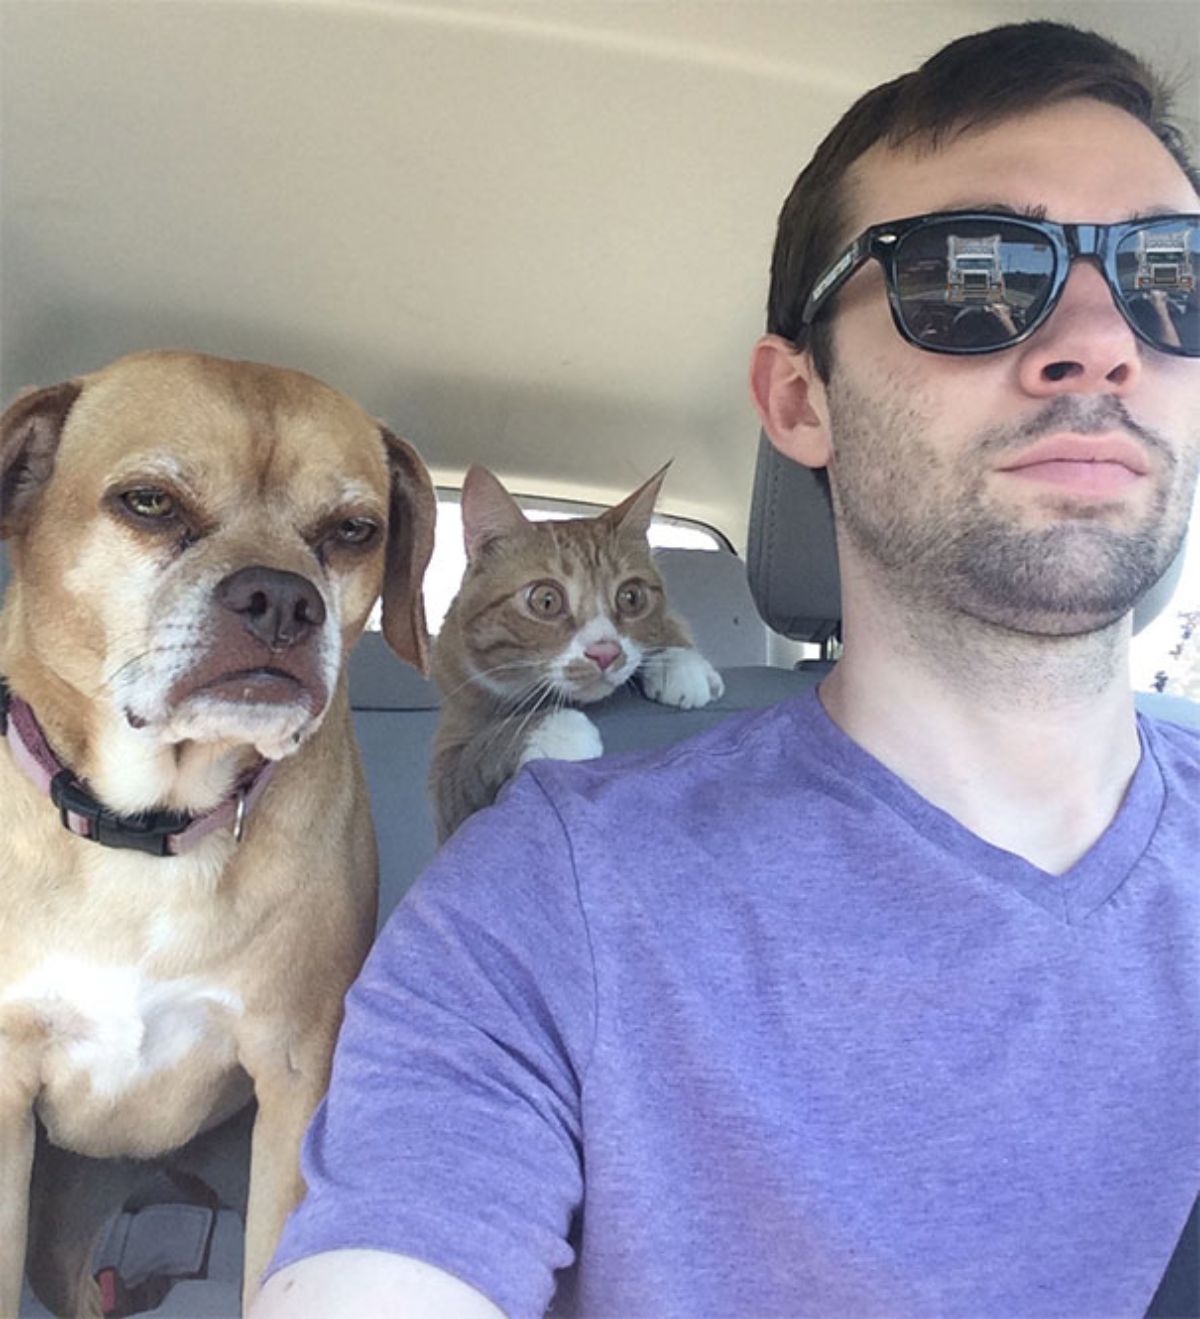 a brown dog and an orange cat looking forward from behind a man in a purple shirt and black sunglasses in a car